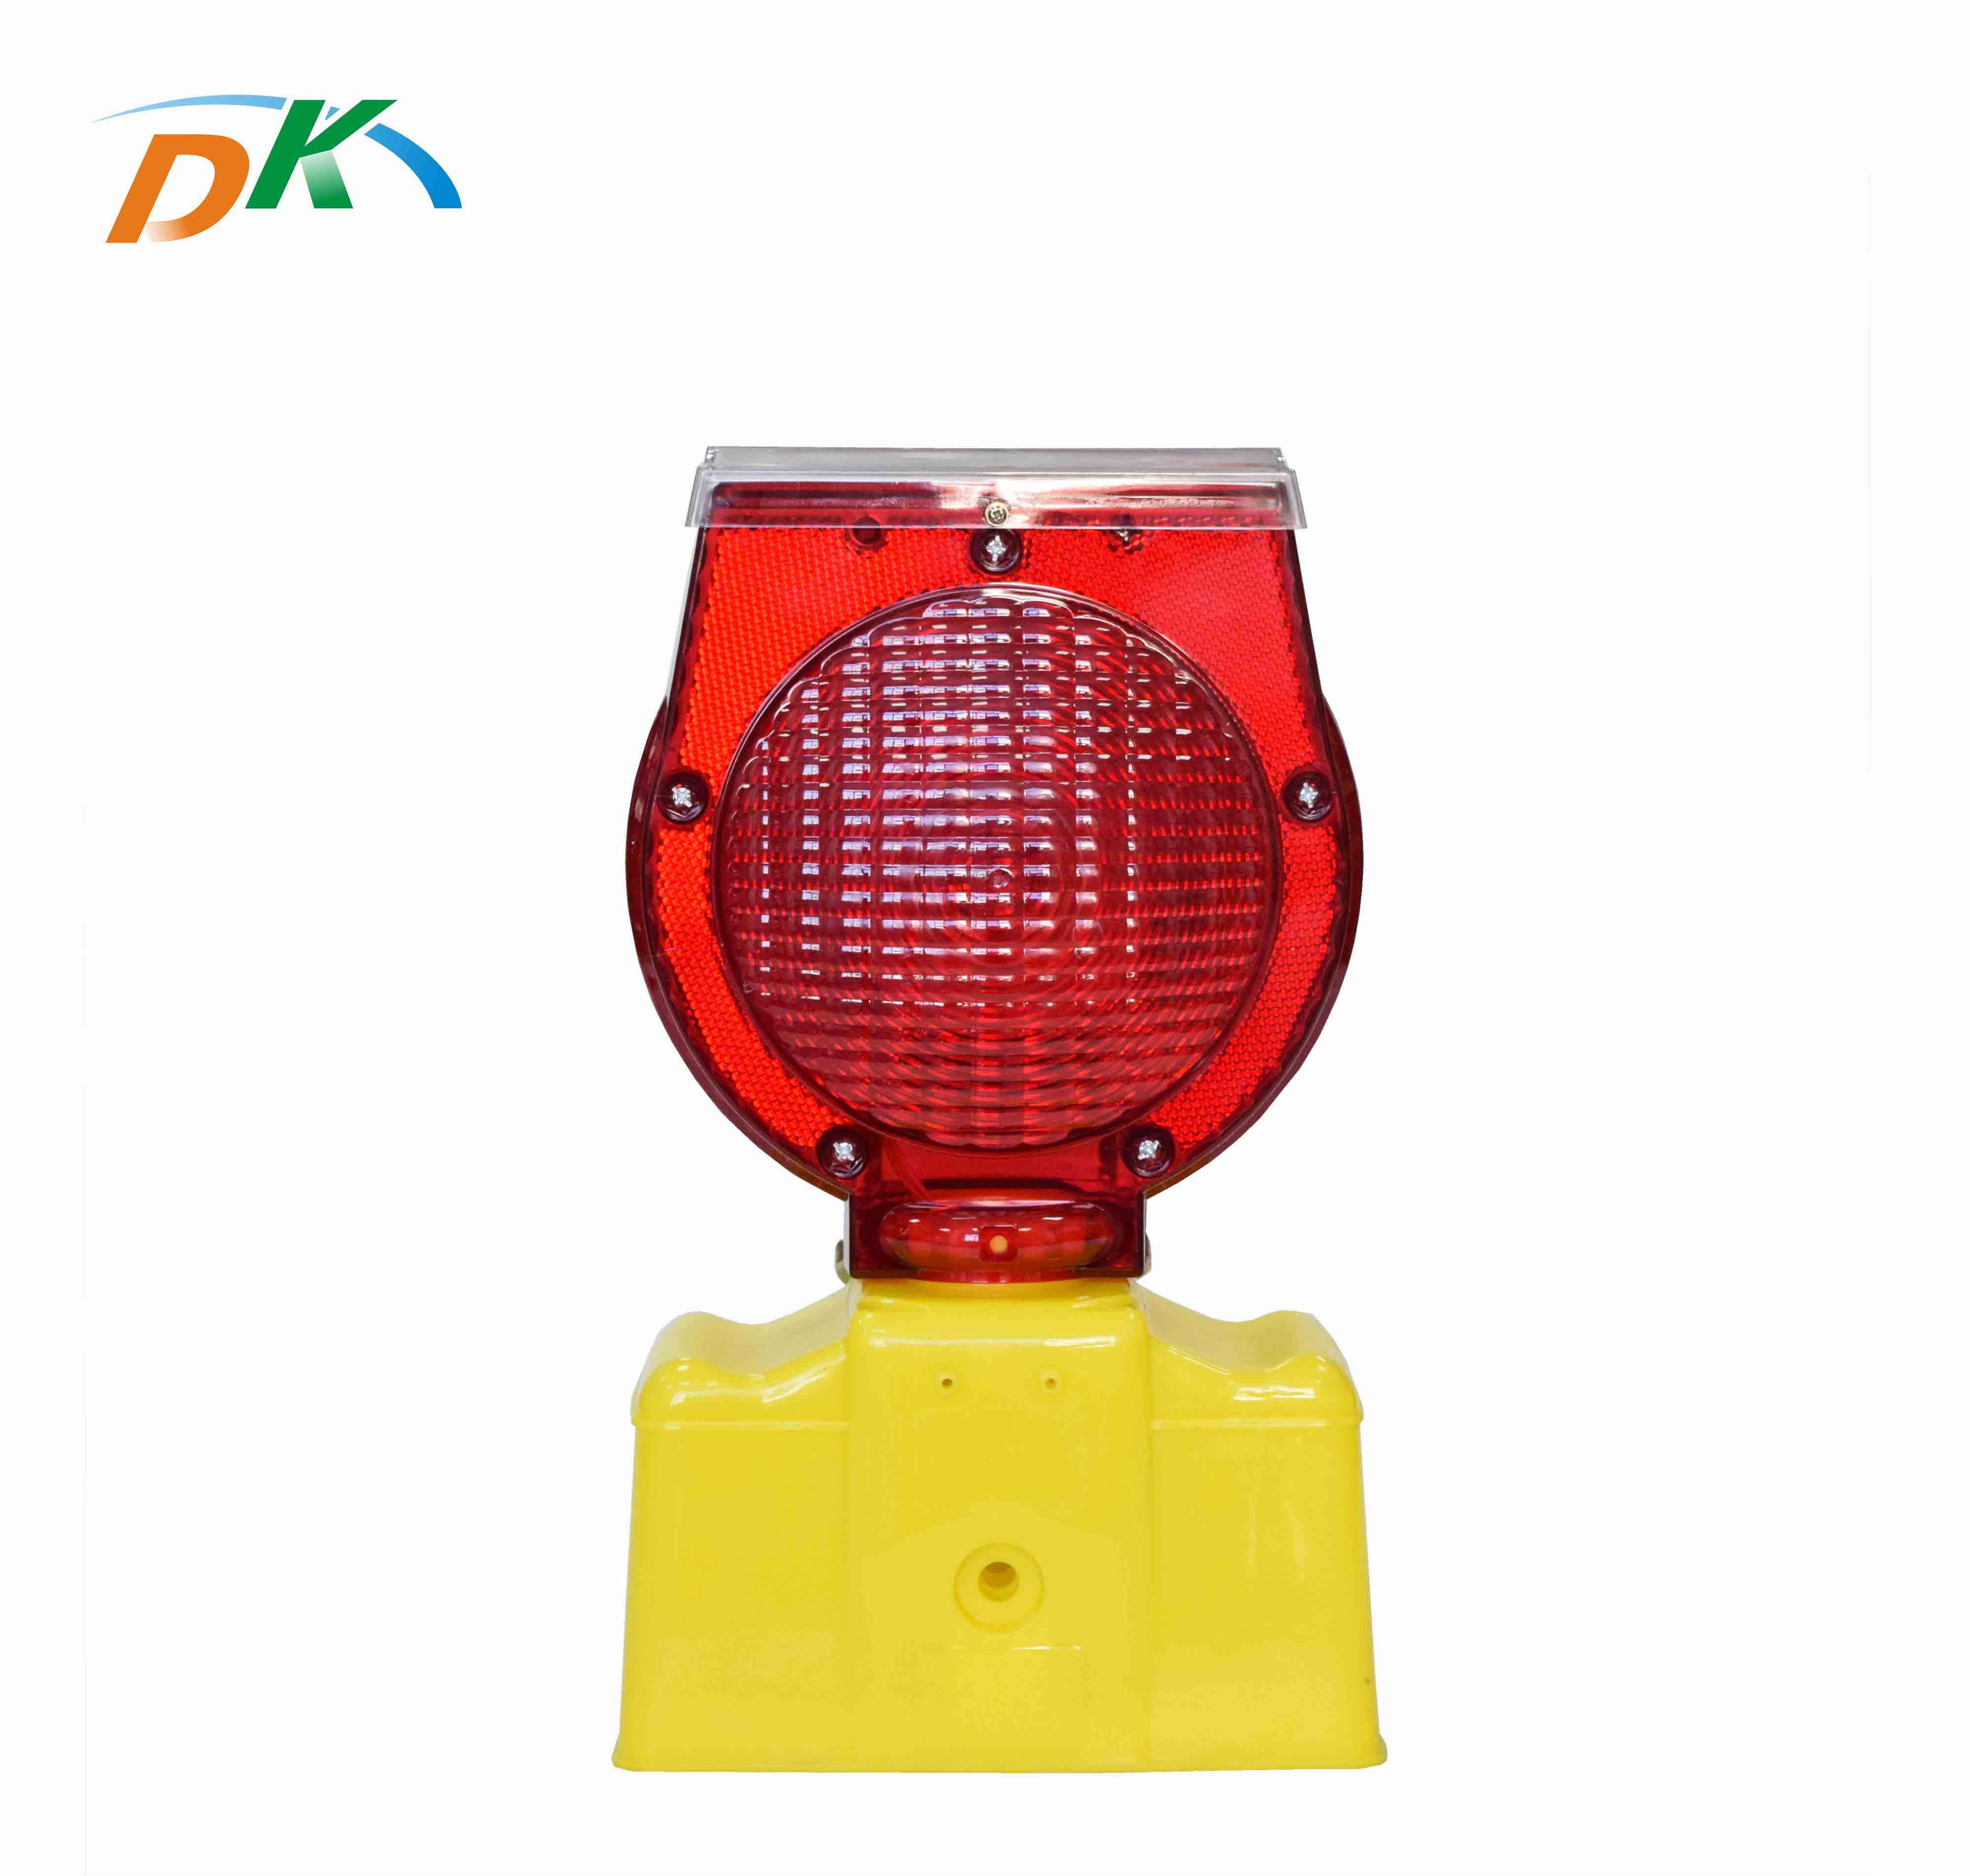 DK PC safety traffic product solar warning light for roadway